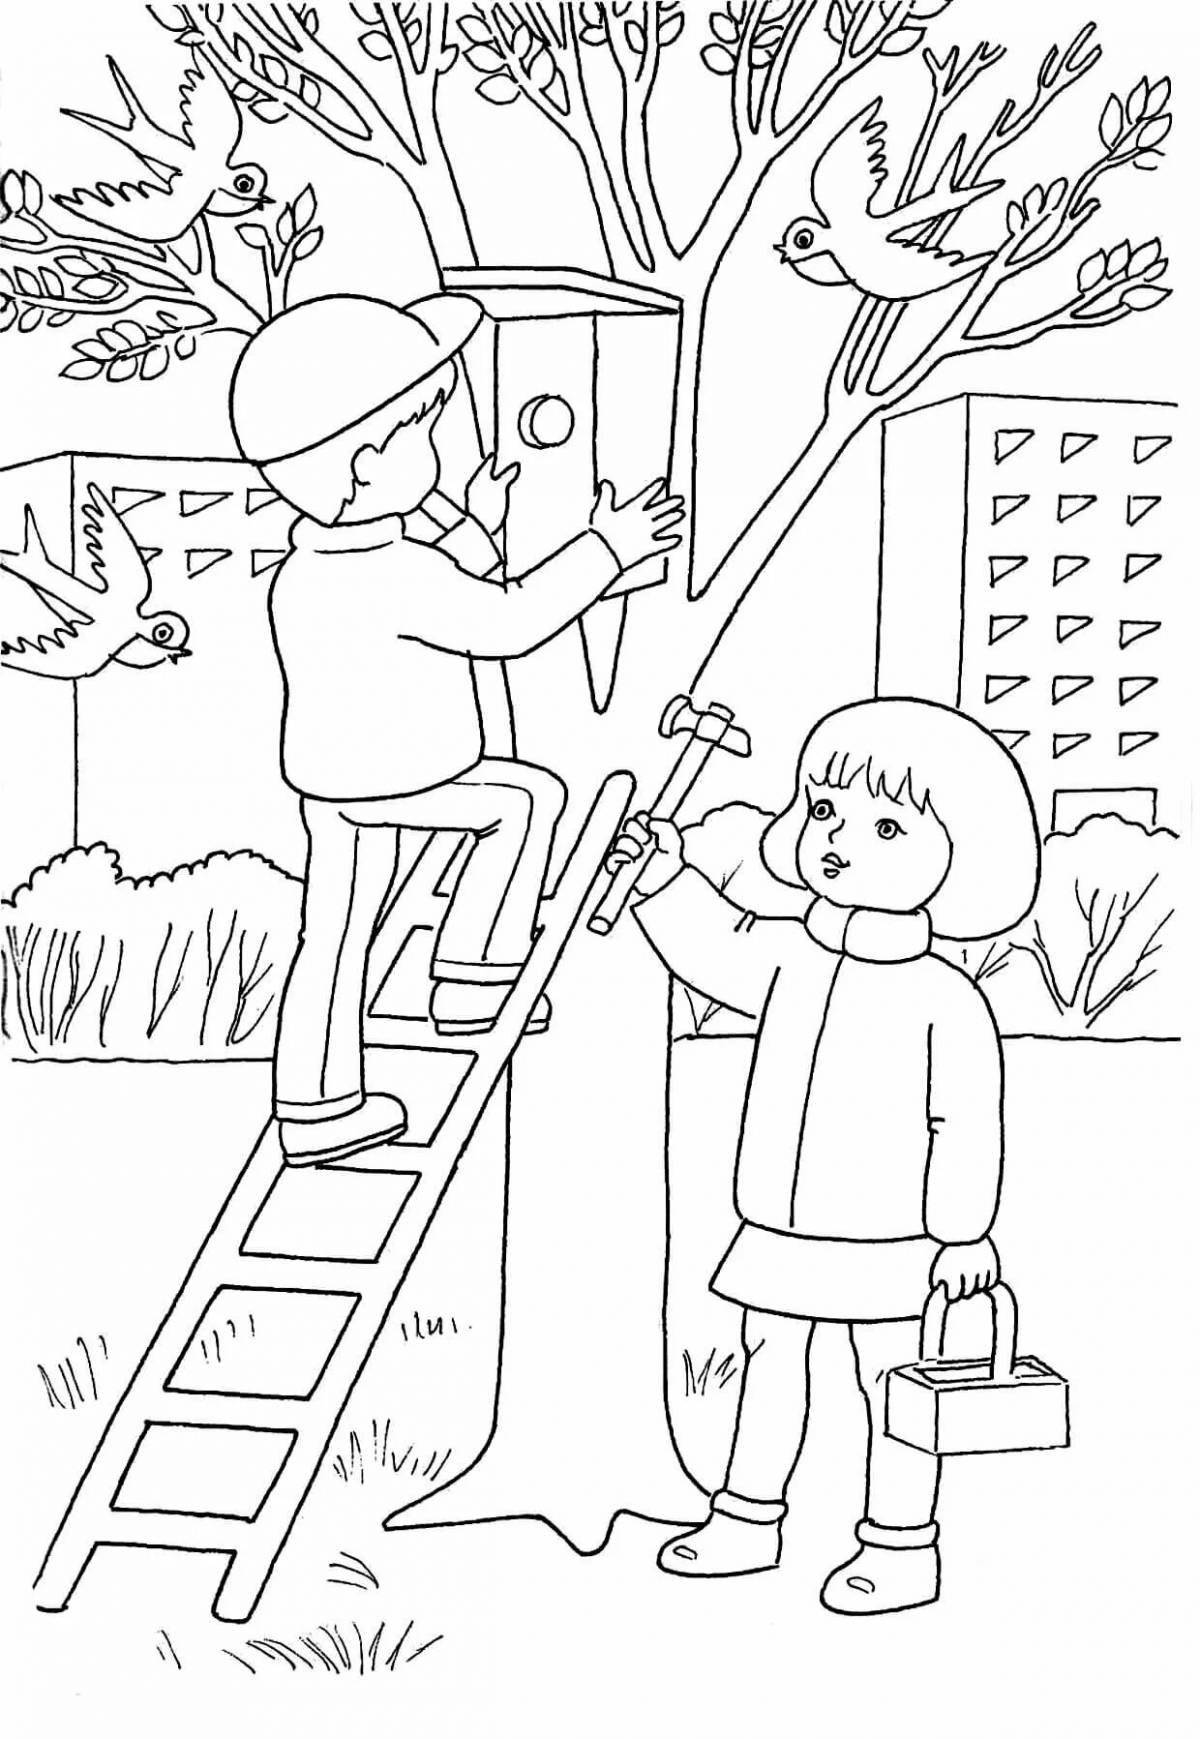 Inspirational Good Deeds coloring page